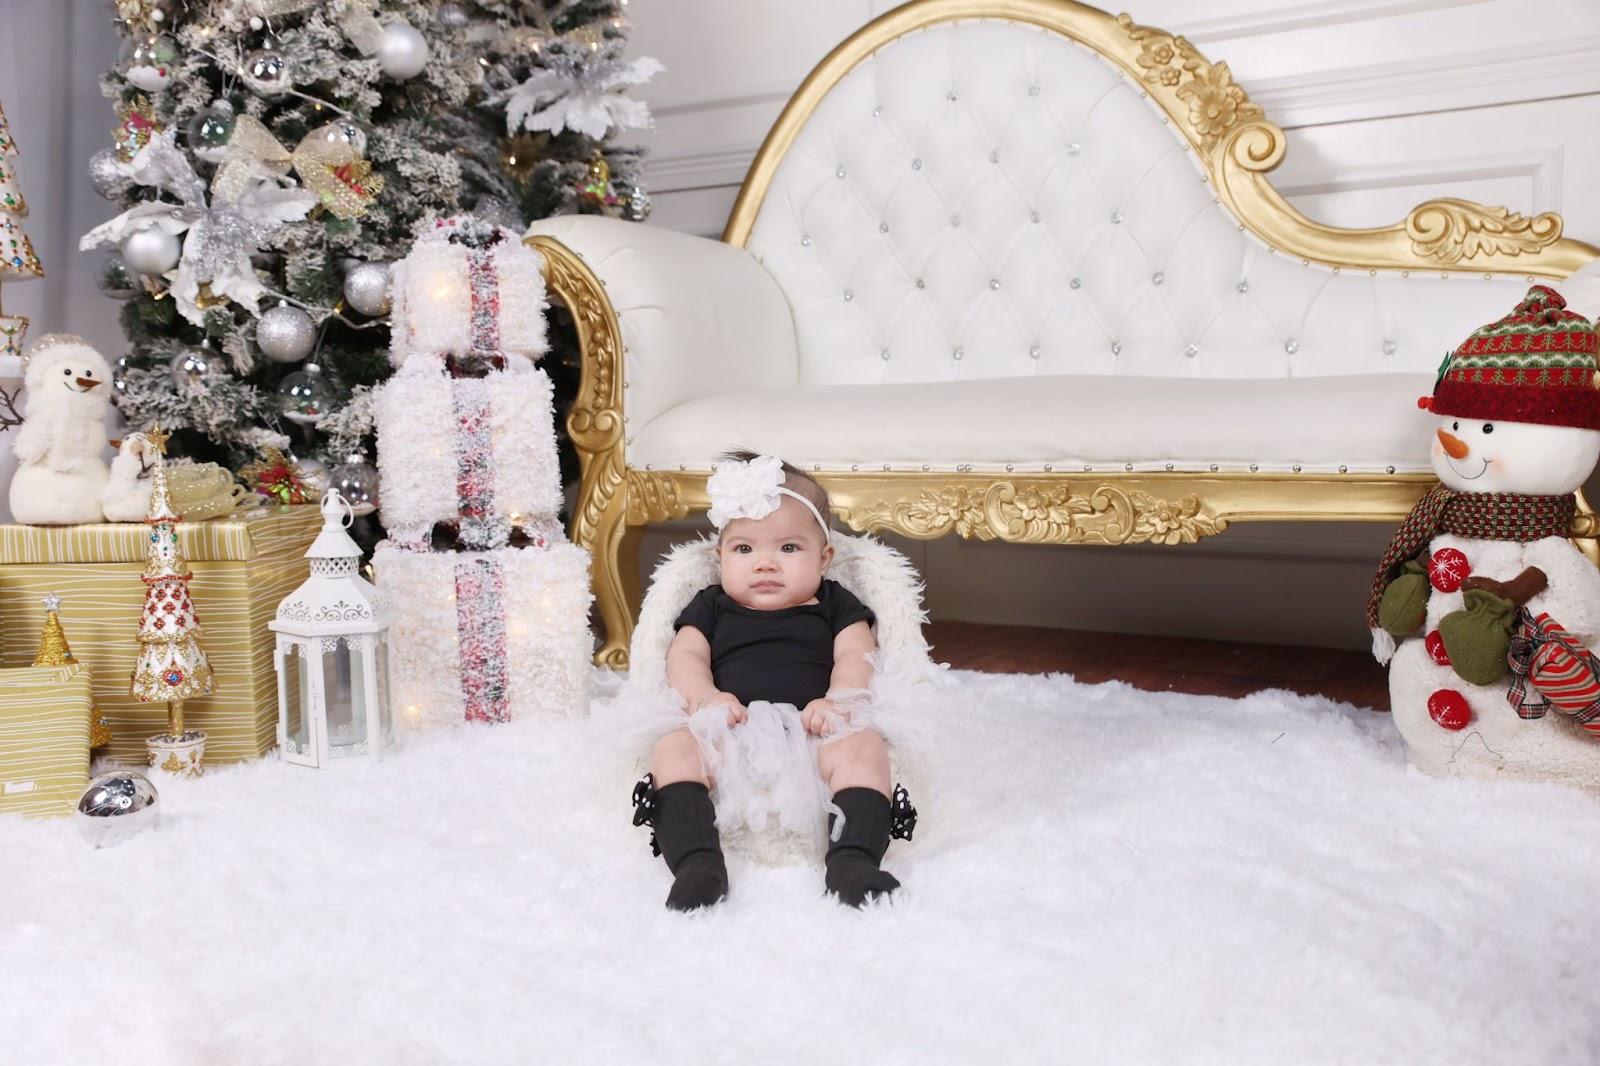 newborn christmas photo idea: baby dressed up in winter outfit while seated on a sofa bed amidst a winter wonderland decor